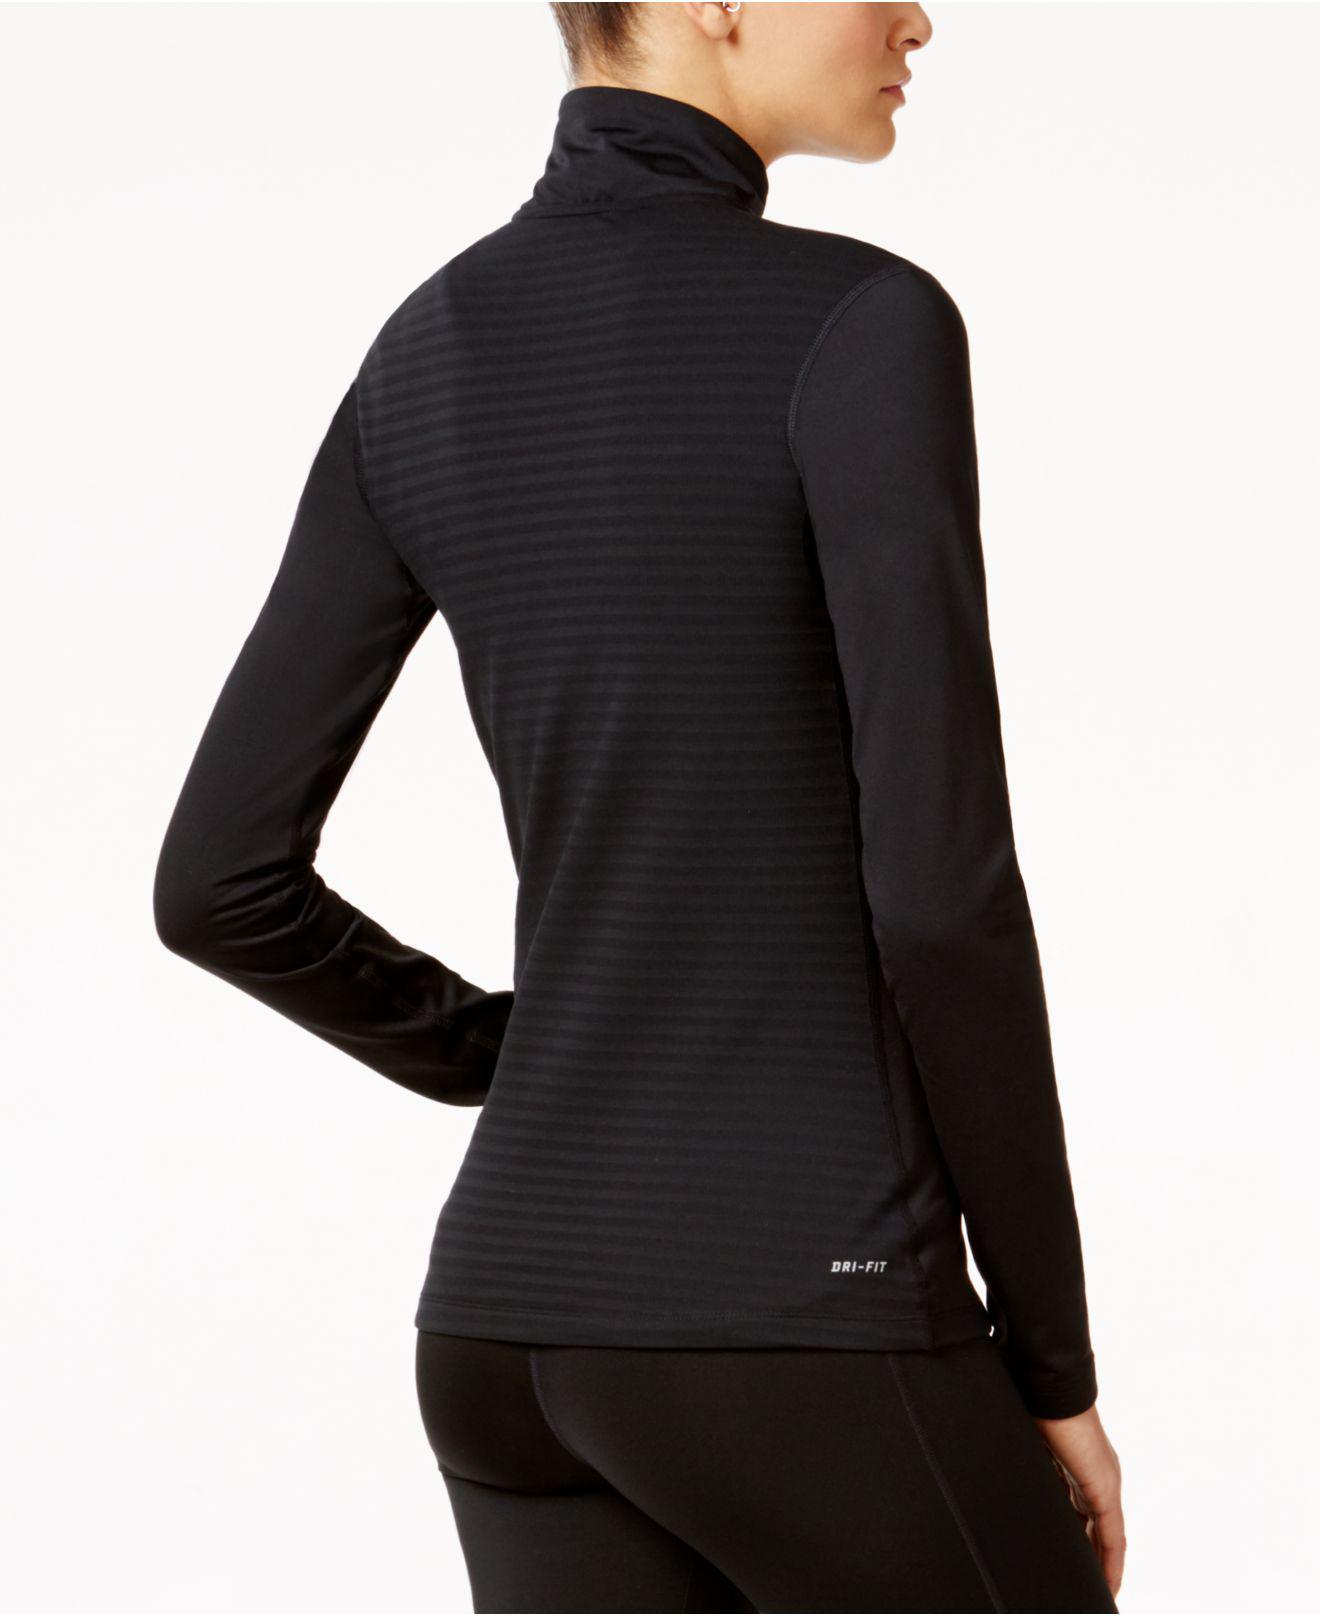 Download Nike Synthetic Pro Warm Dri-fit Half-zip Training Top in ...